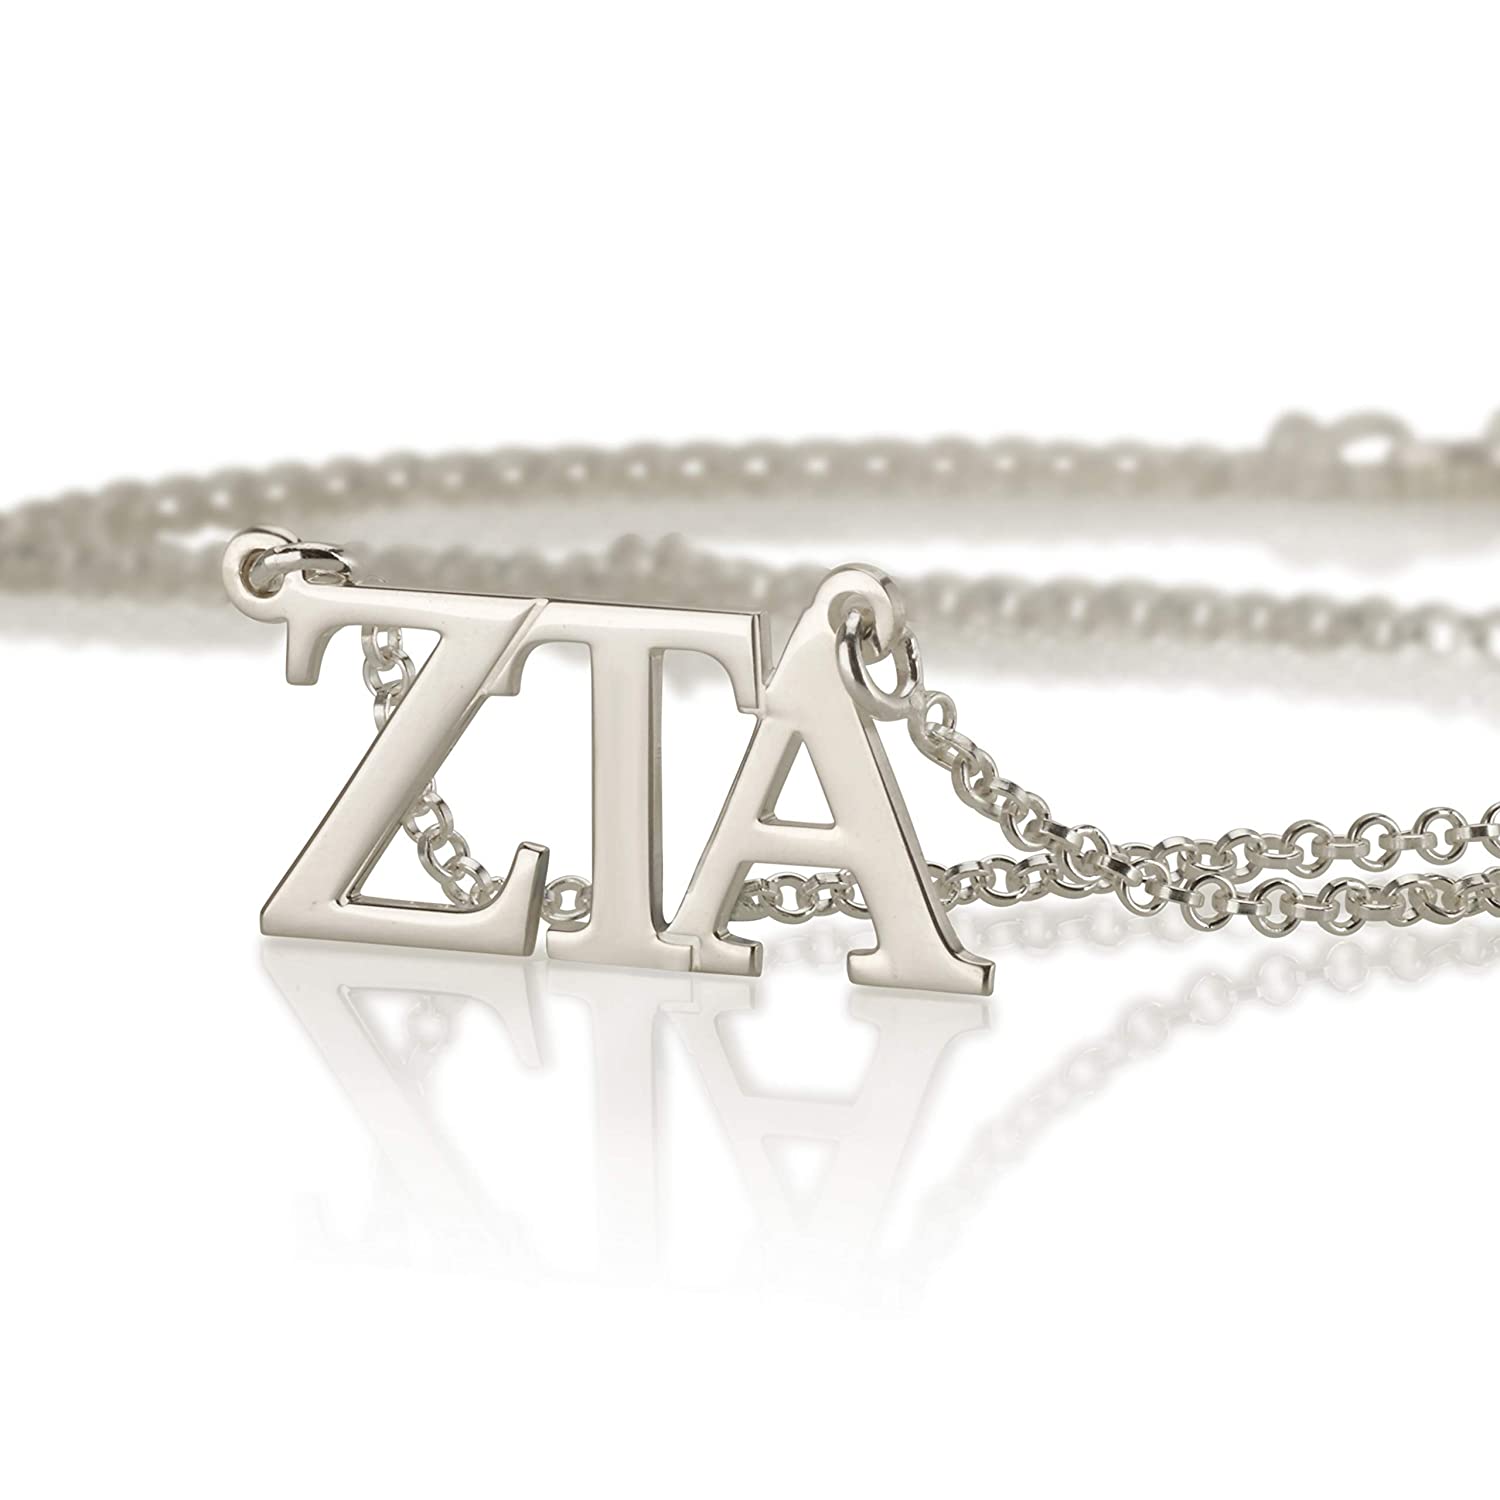 Zeta Tau Alpha Necklace 925 Sterling Silver, Personalized Sorority Jewelry Gifts